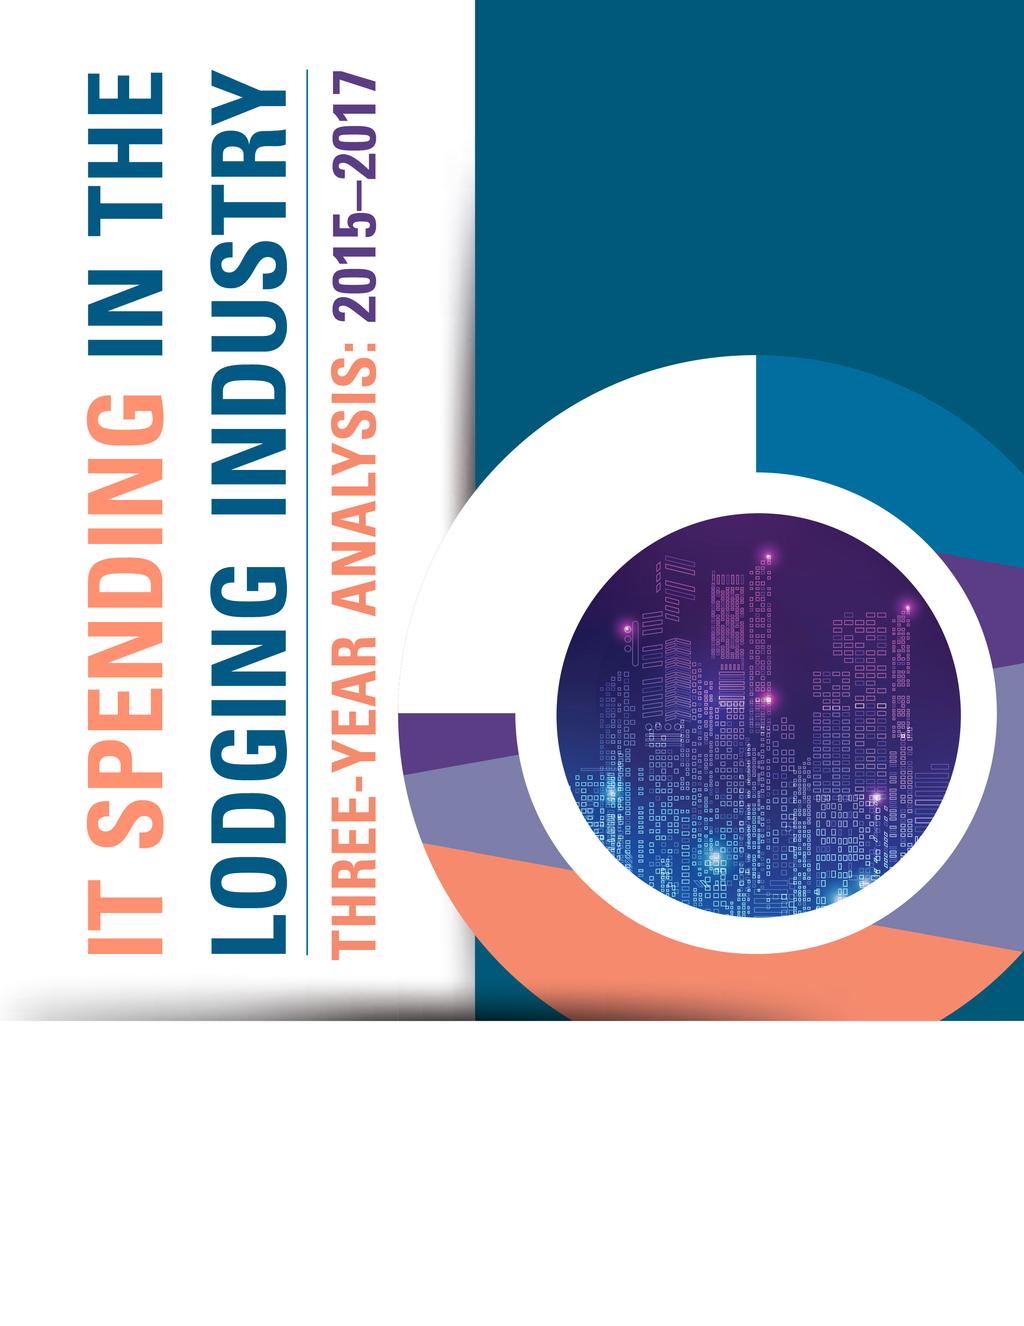 PART II AN ANALYSIS OF IT SPENDING DATA IN THE LODGING INDUSTRY BASED ON REPORTING IN THE NEW USALI SCHEDULE 6 INFORMATION AND TELECOMMUNICATIONS SYSTEMS.